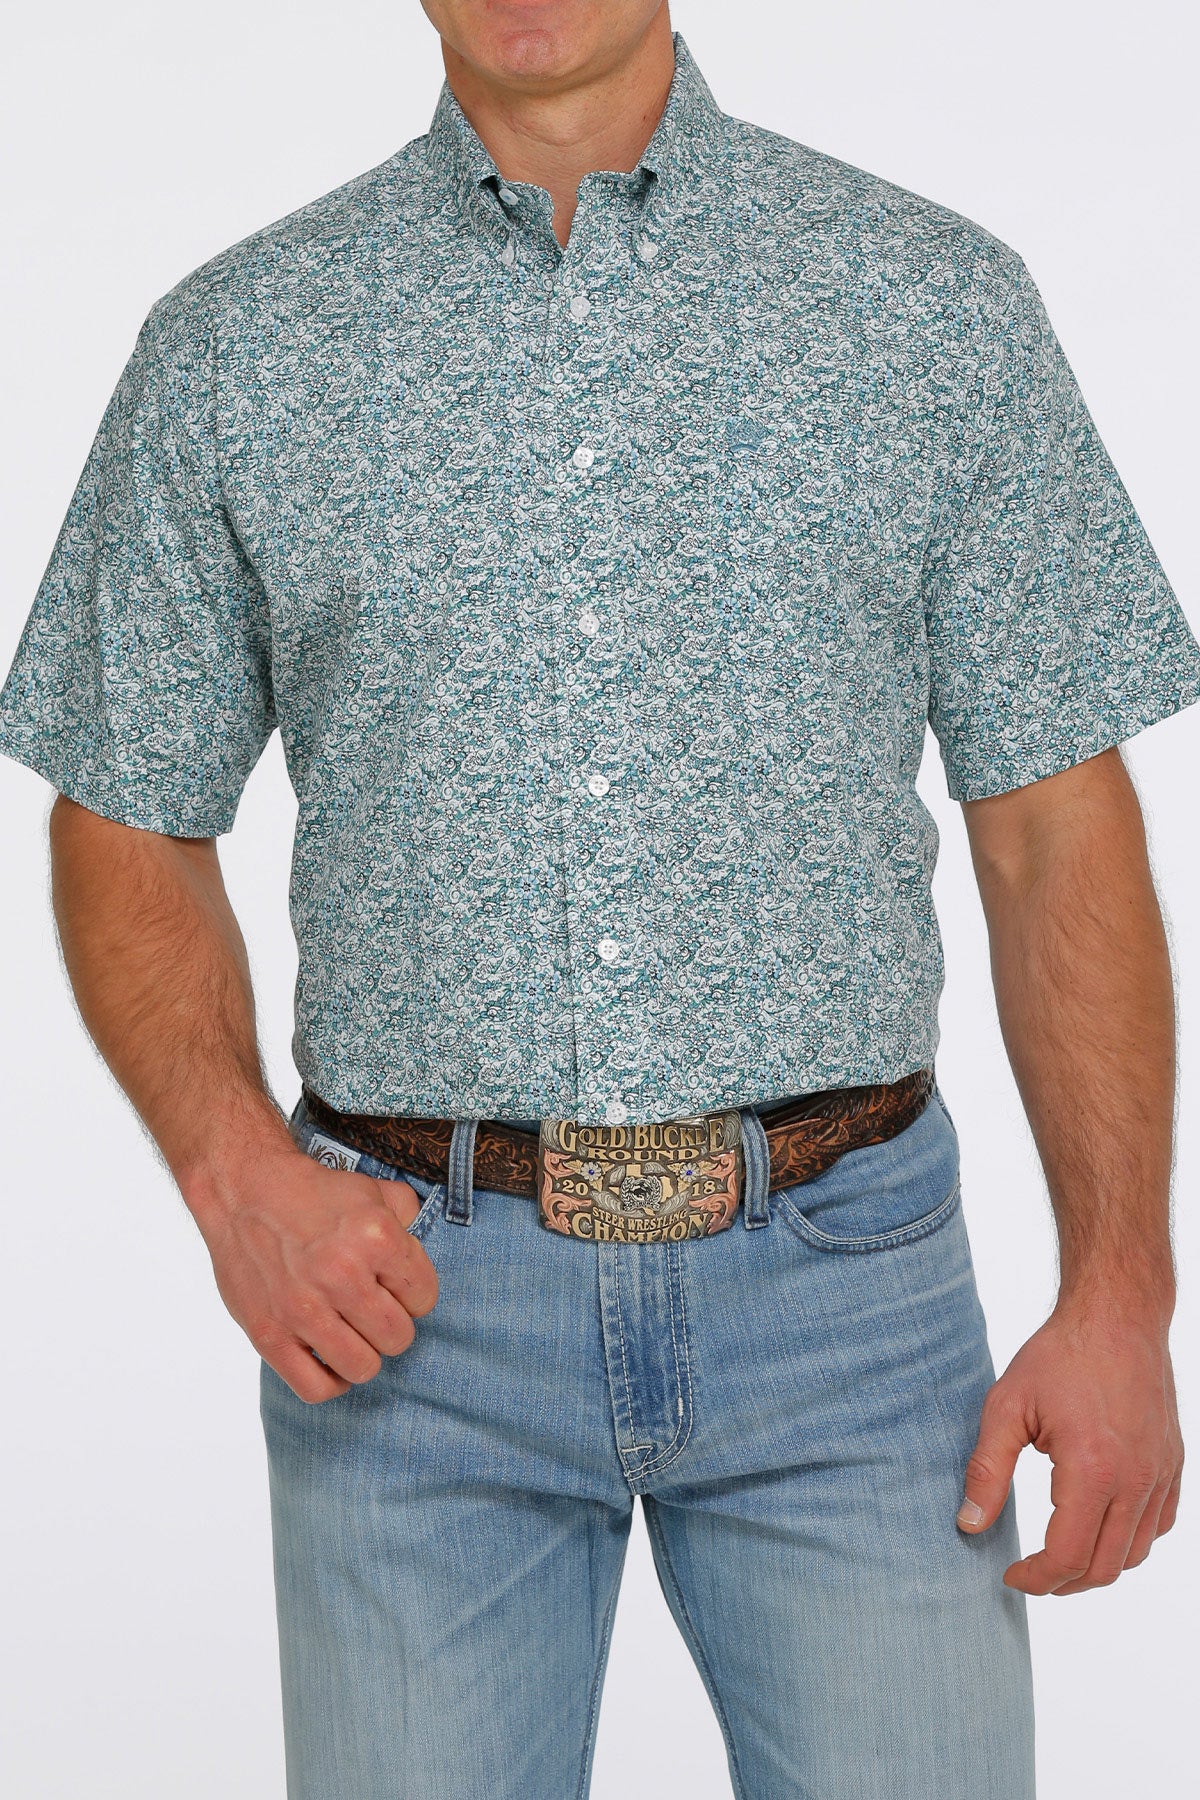 Cinch Shades of Blue SS Button Down